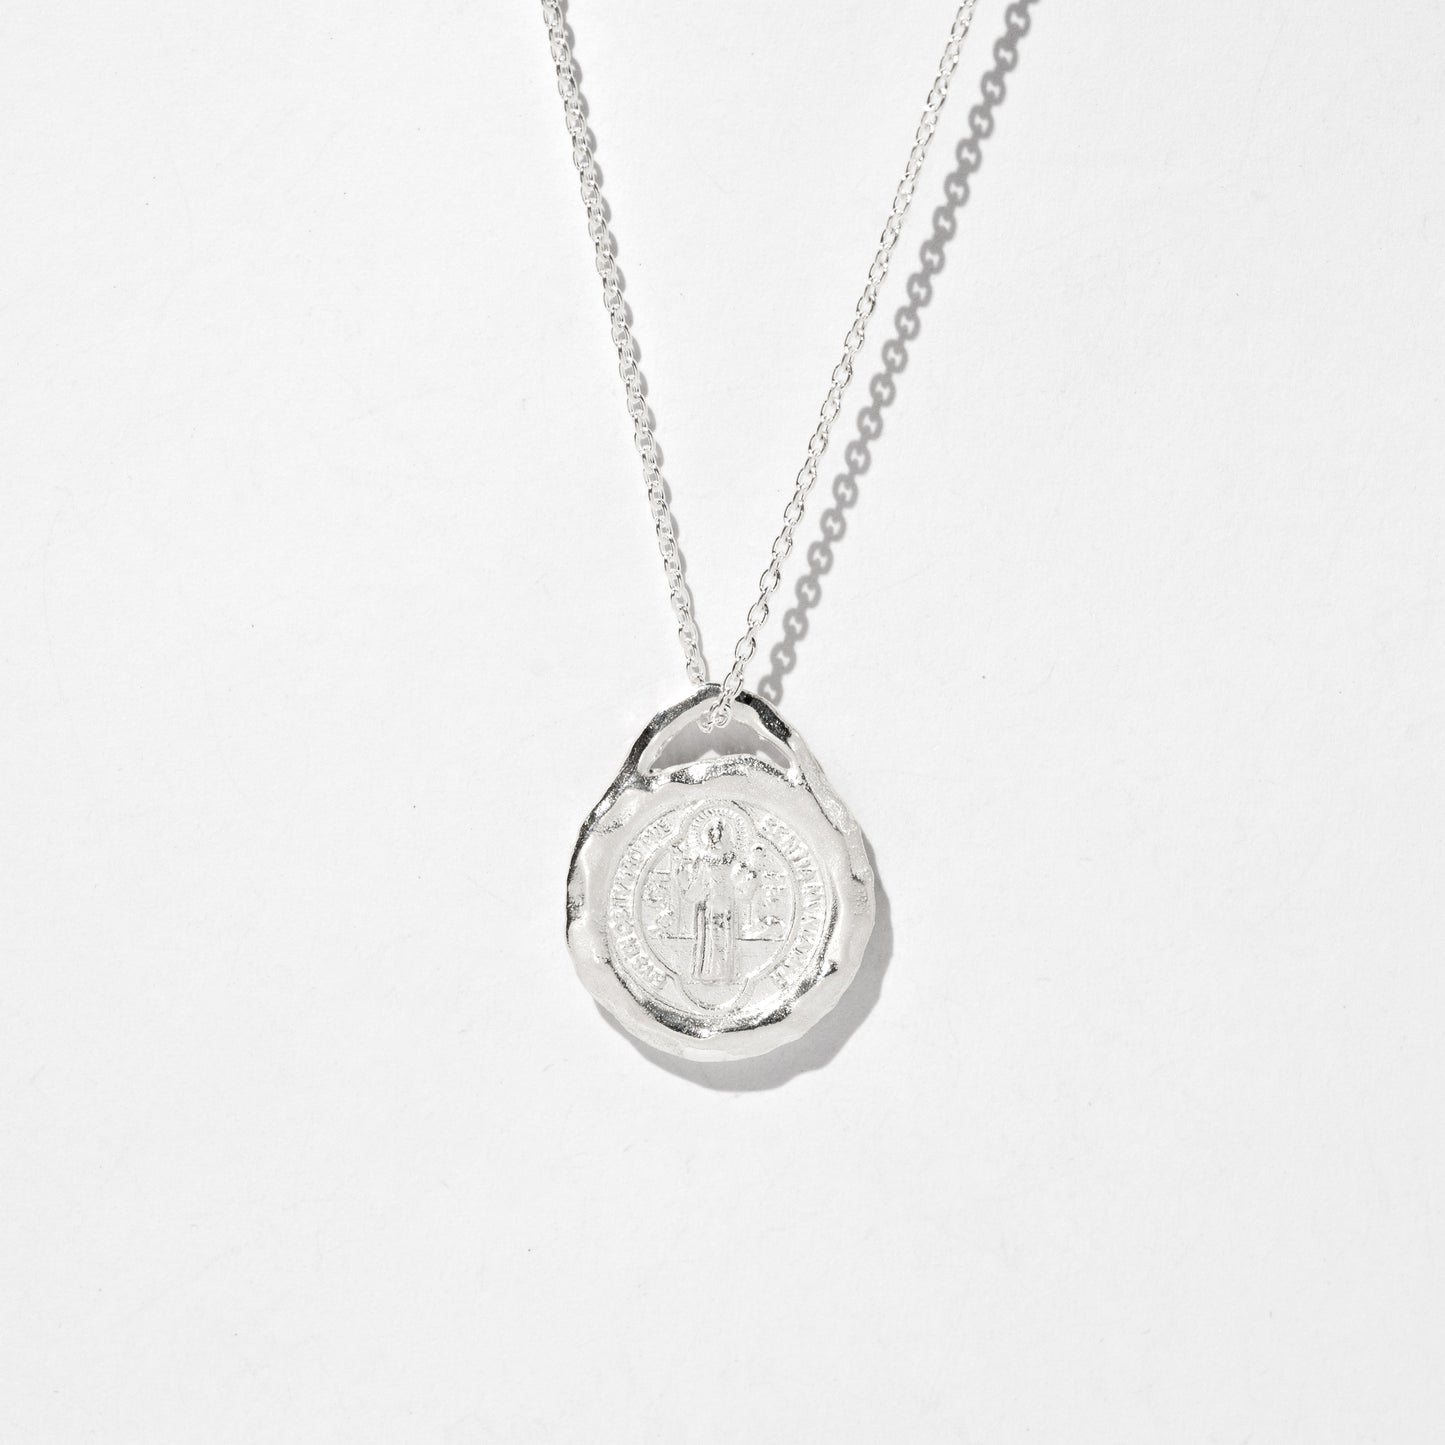 The Saint Benedict Medal Necklace